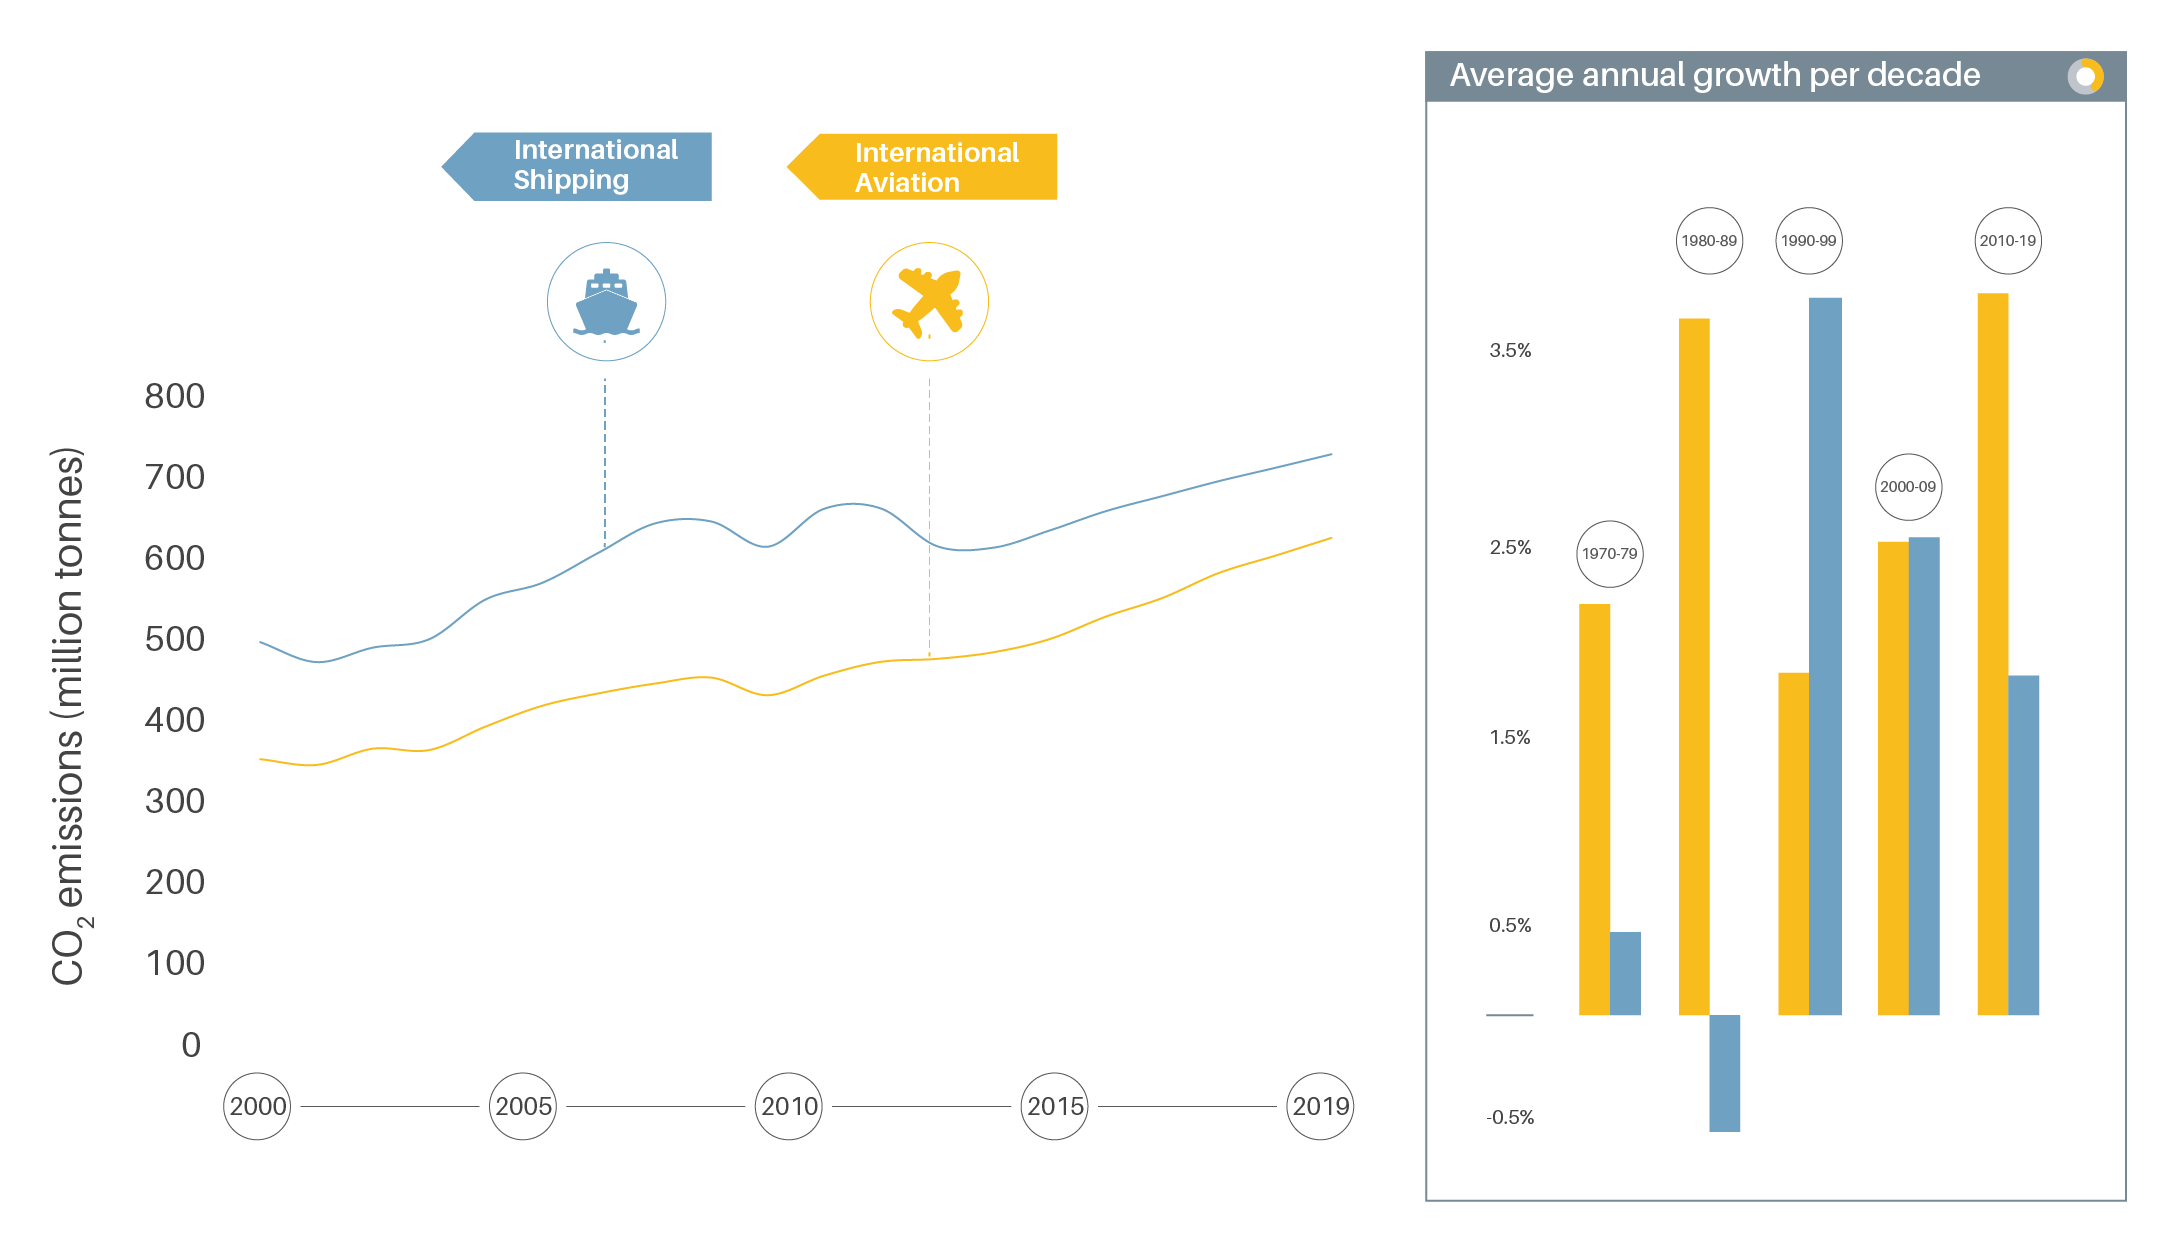 Emission growth in international aviation versus shipping